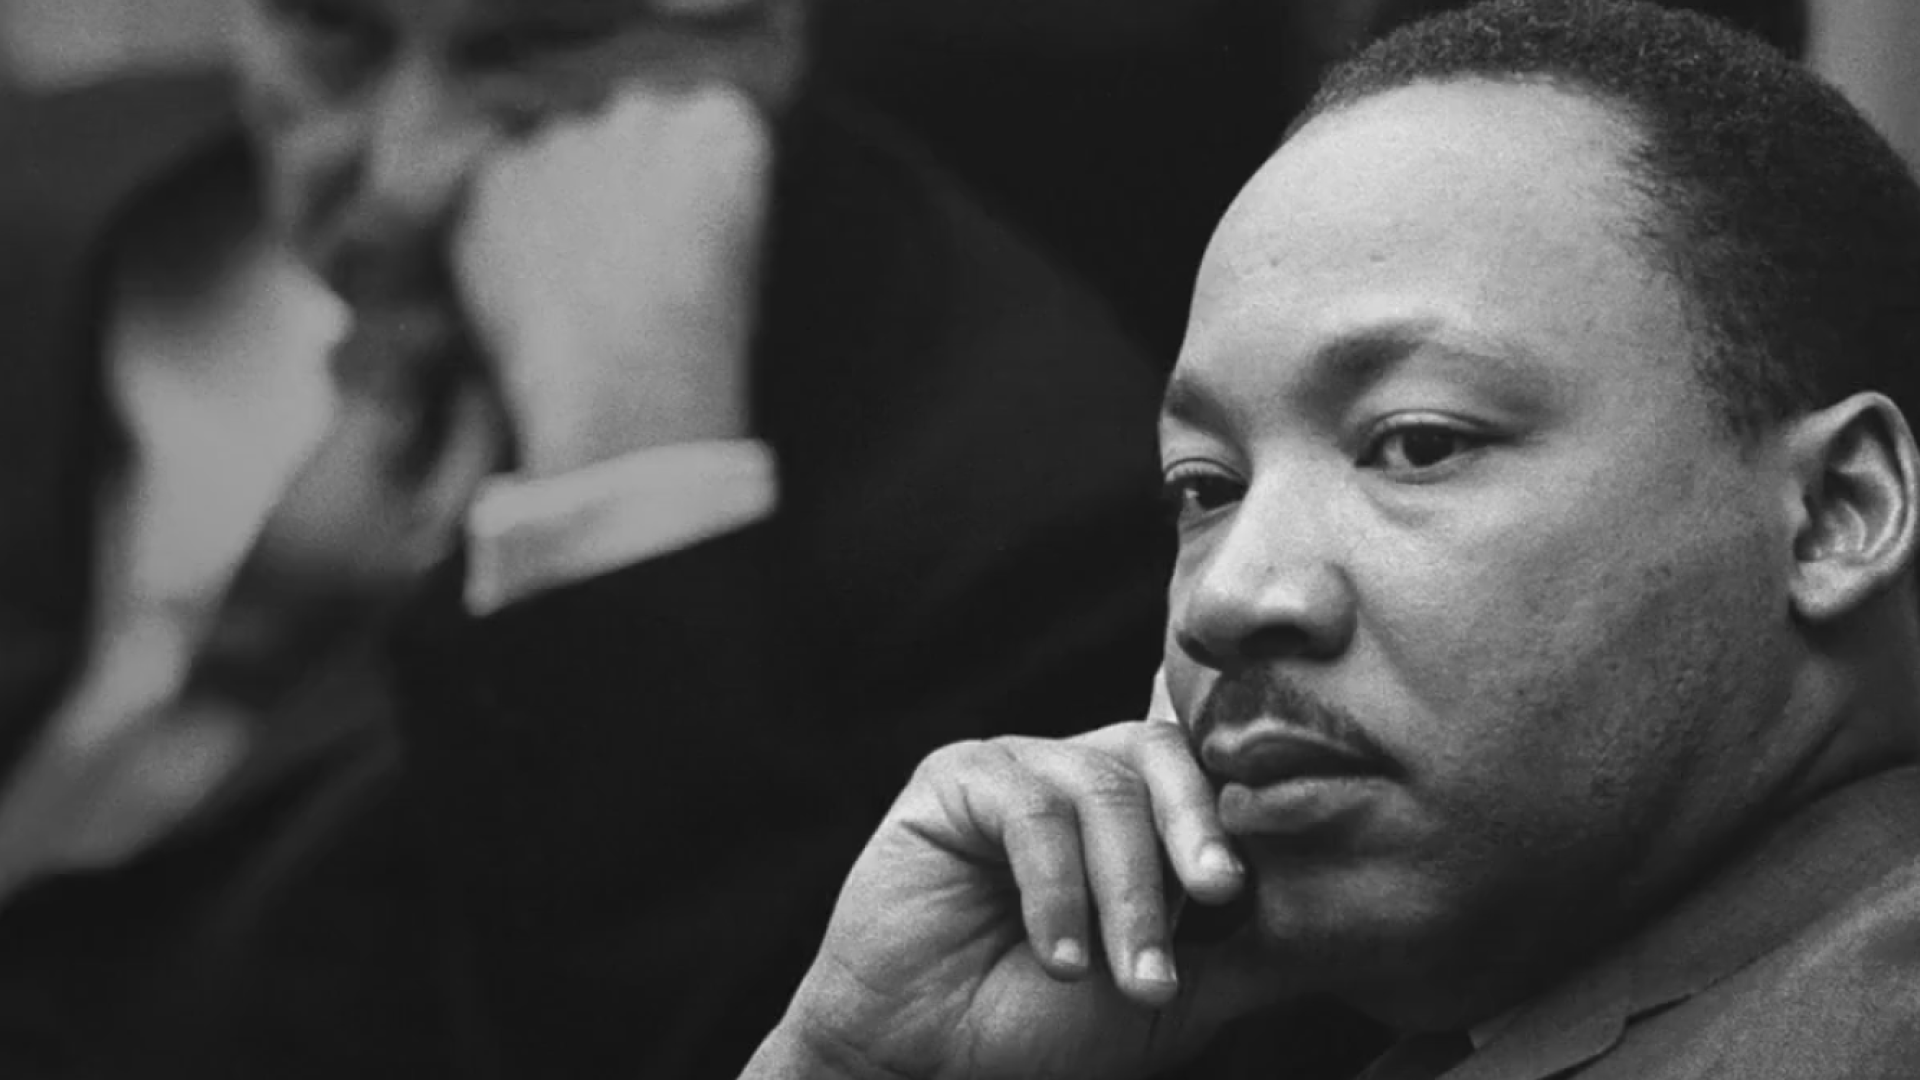 55 years since Dr. Martin Luther King, Jr. was assassinated